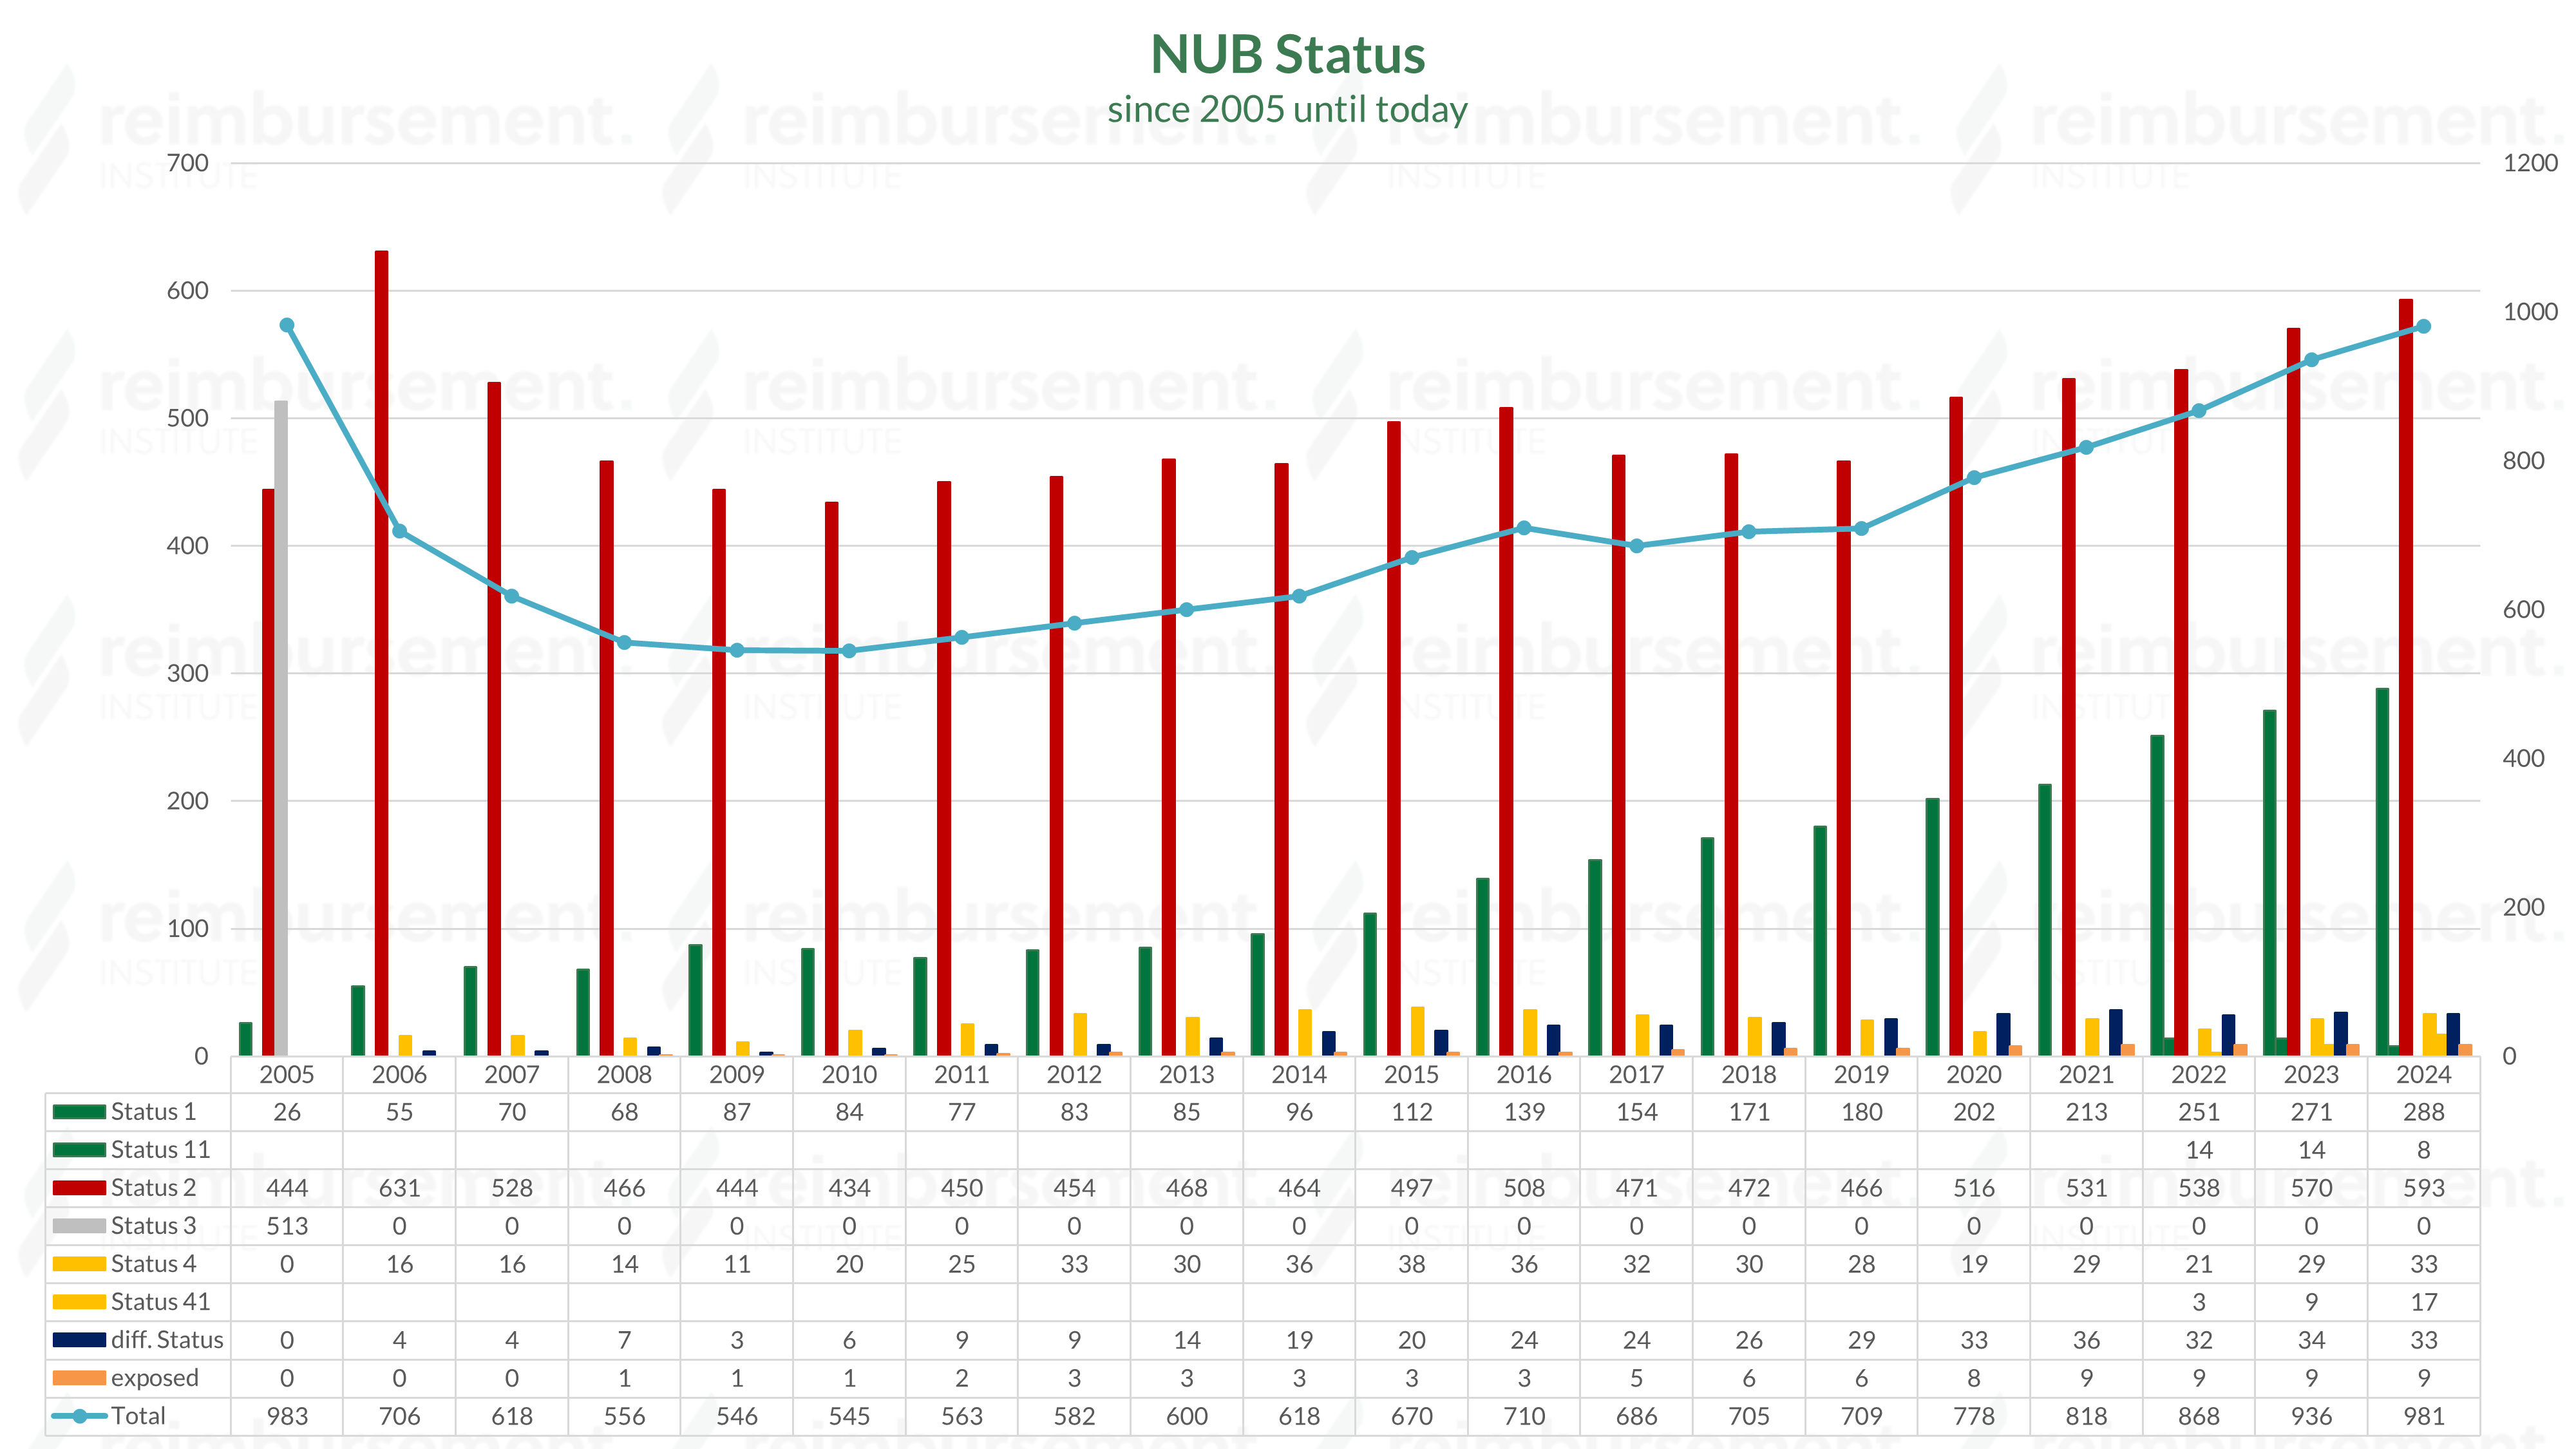 NUB status 1, 2, 3 and 4 since 2005 with number including differentiated status or suspended rating